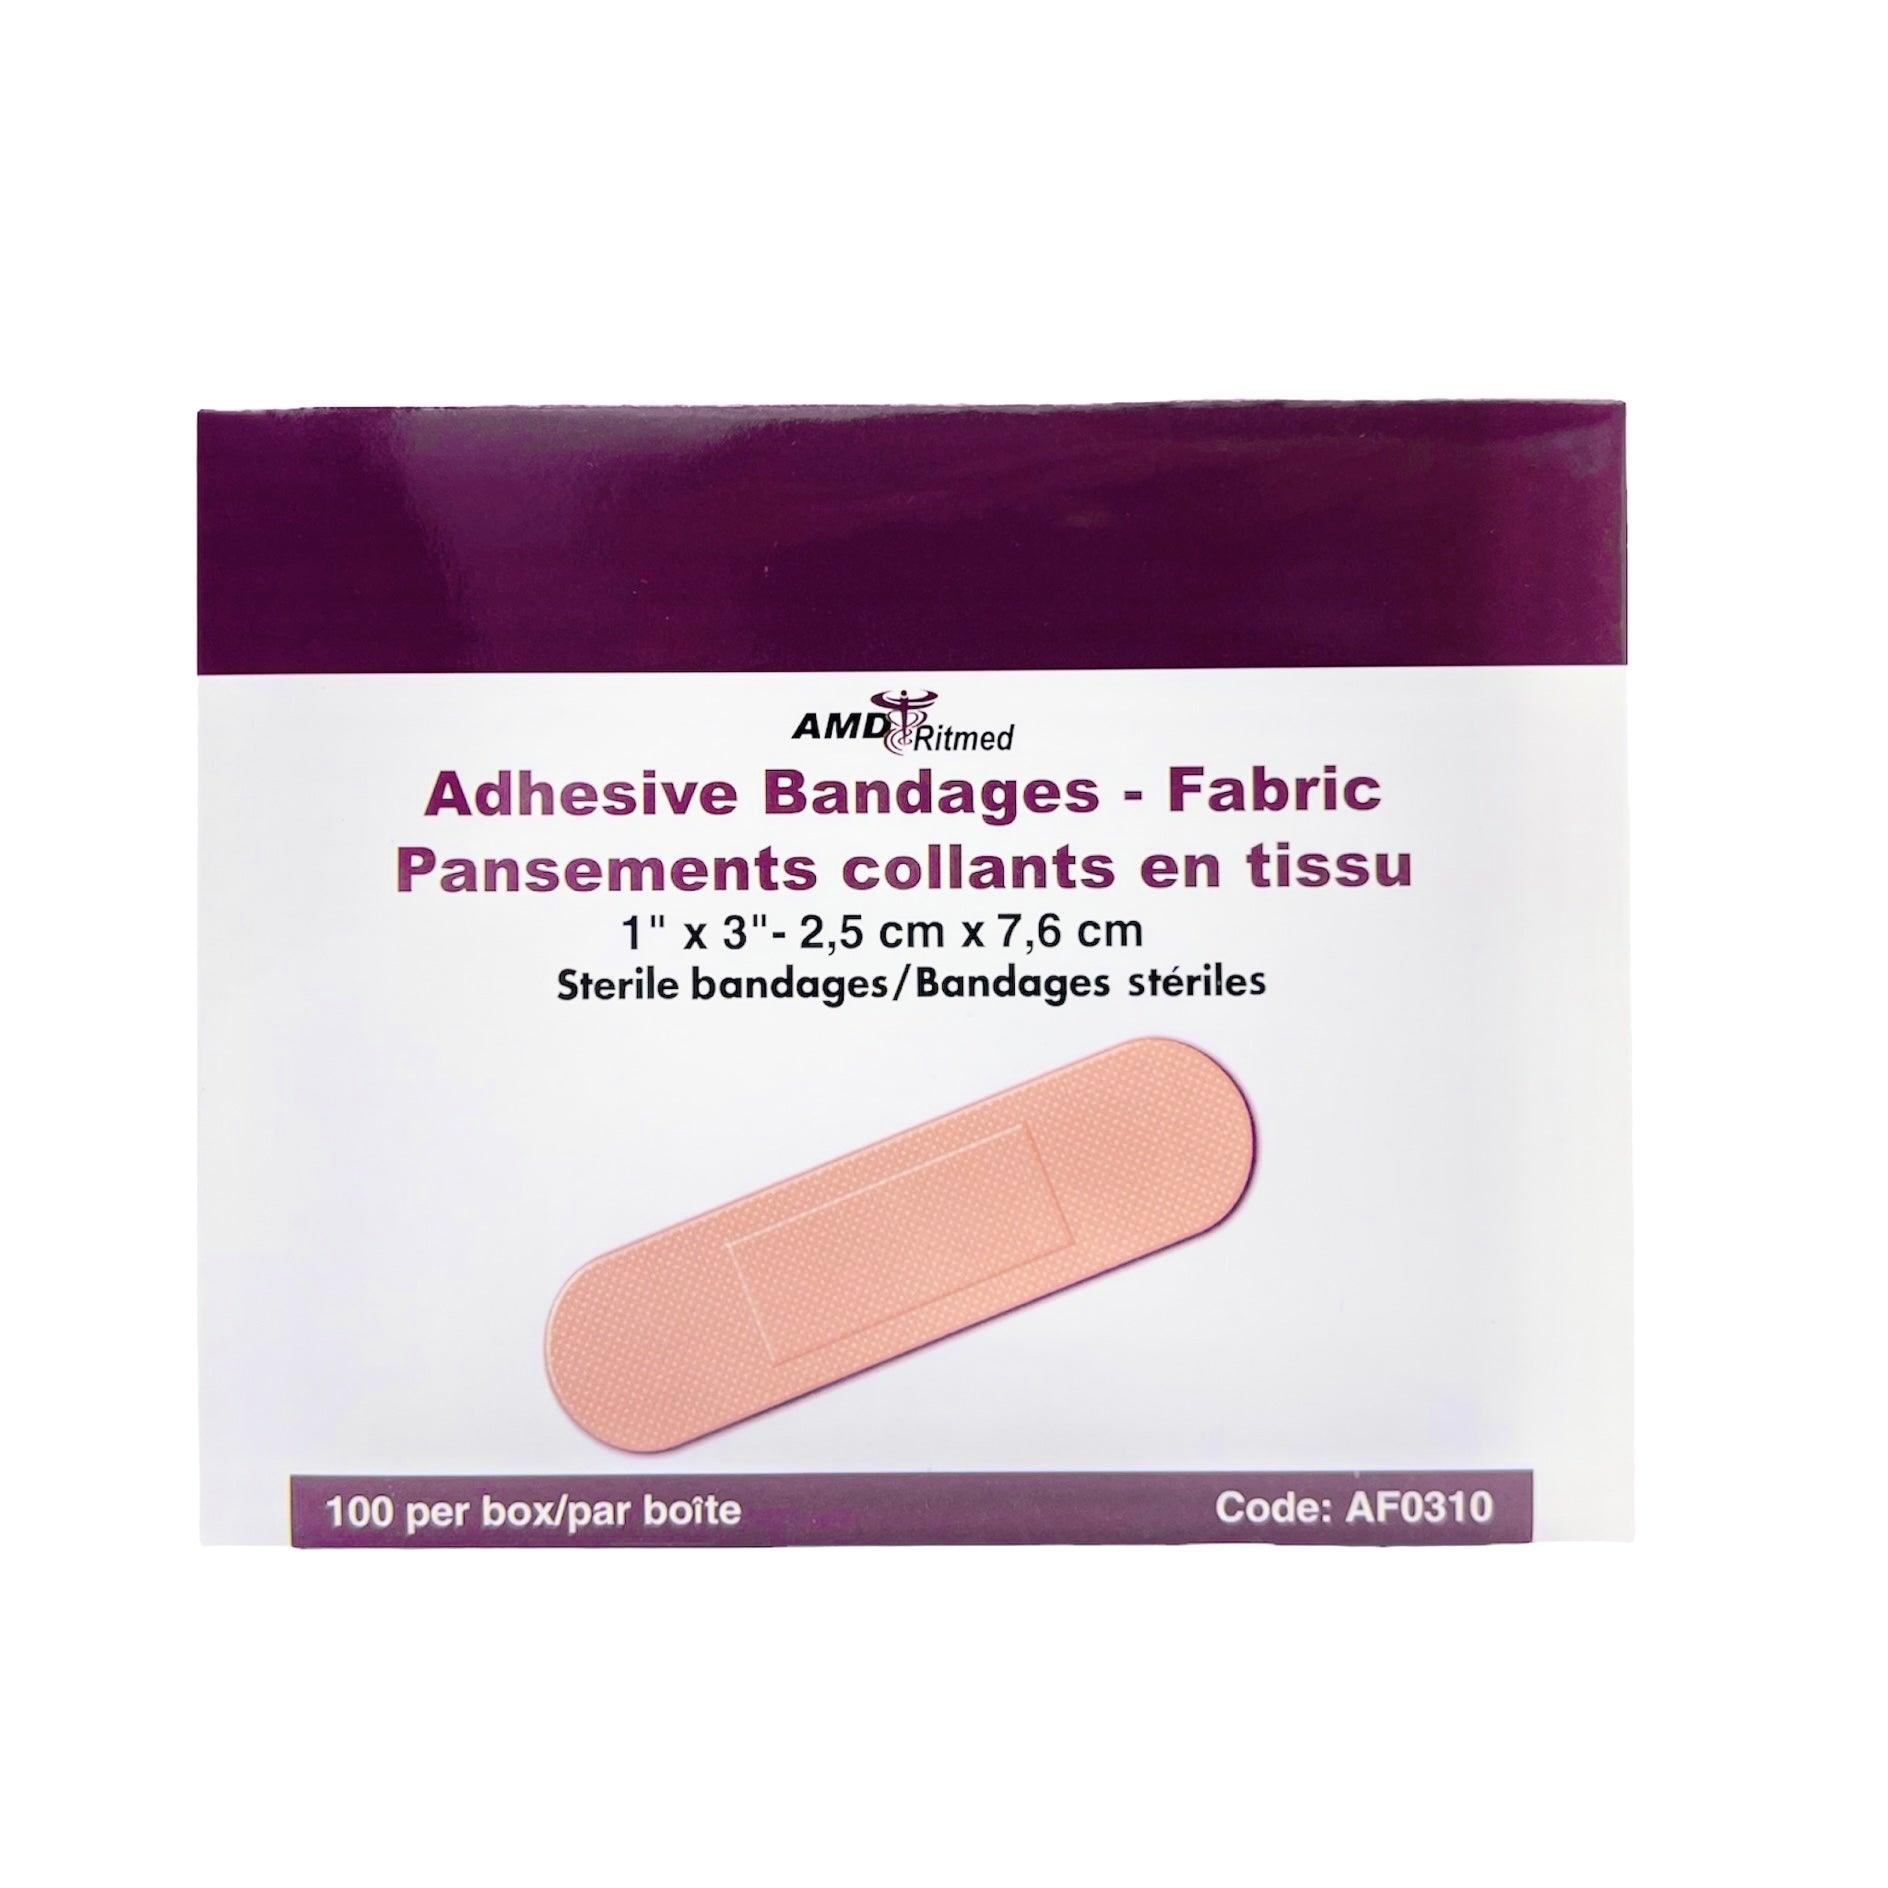 AMD Ritmed® Adhesive Sterile Bandage - Coolants Fabric for Tissue